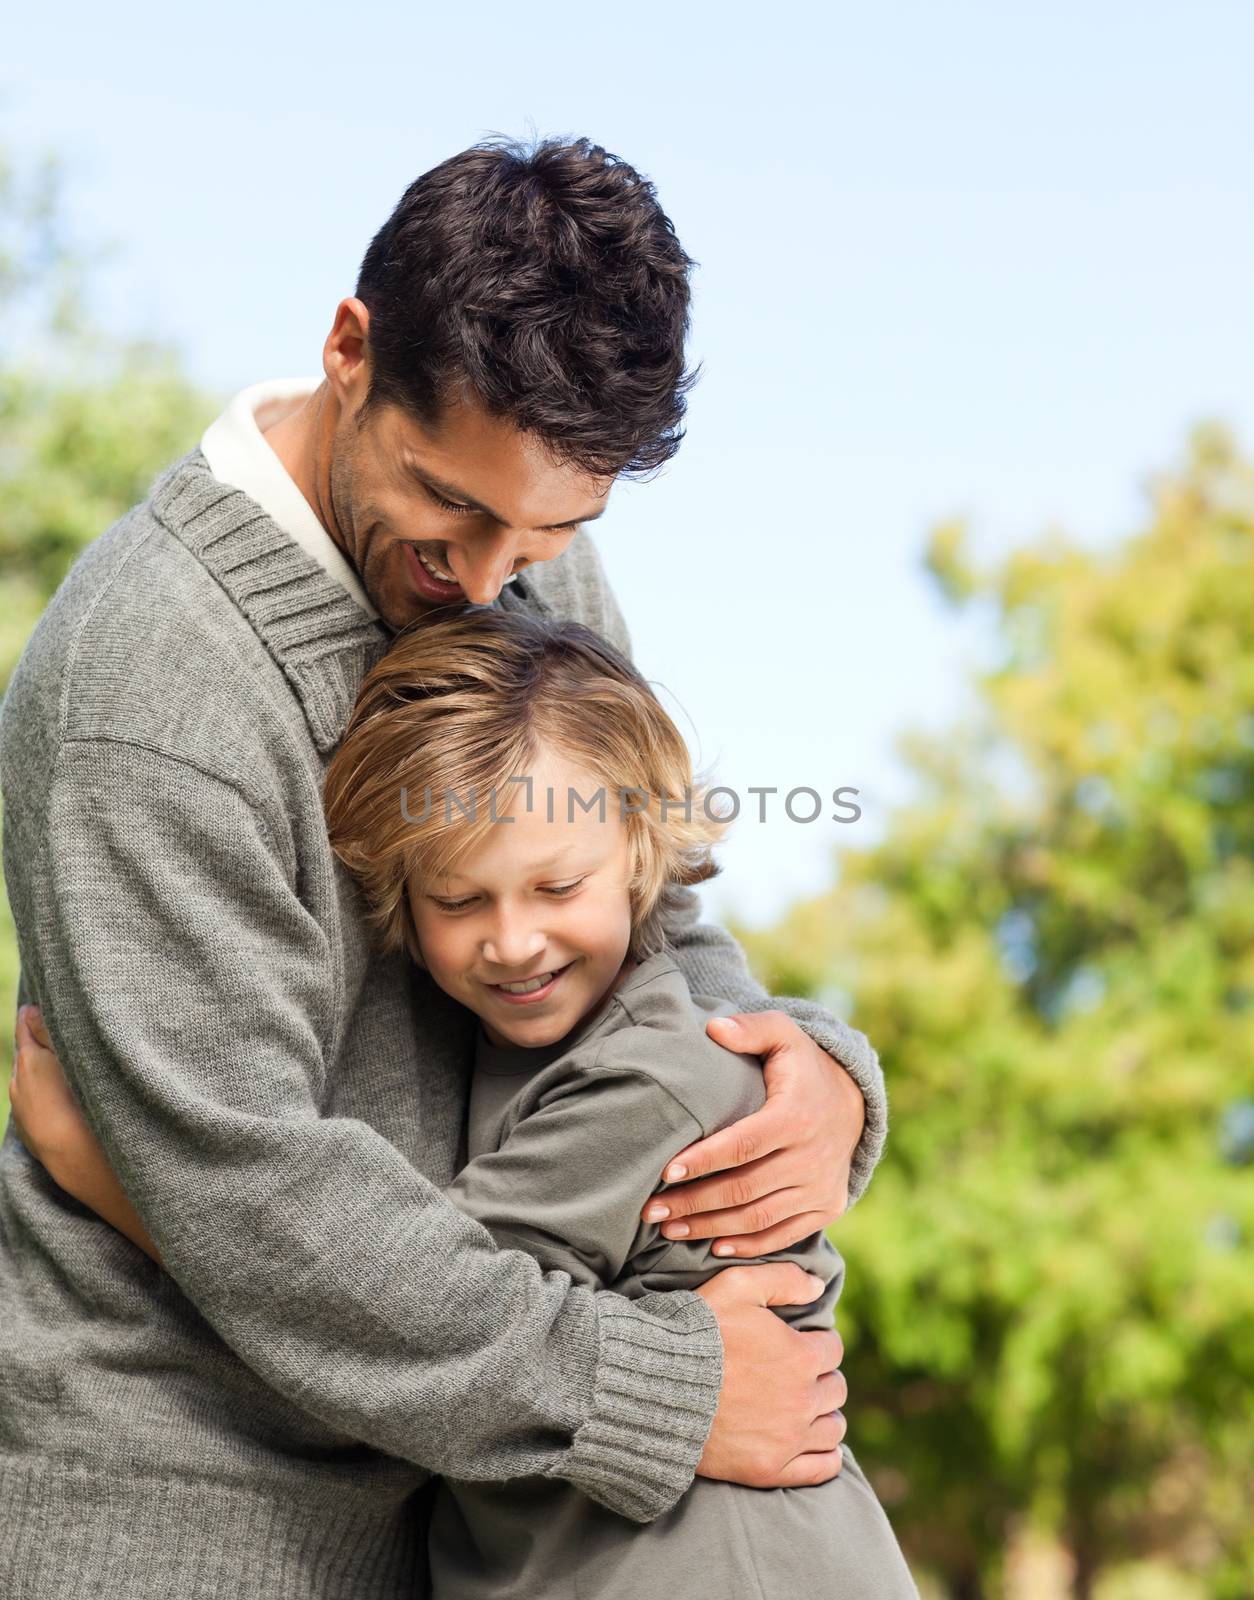 Son embracing his father during the summer